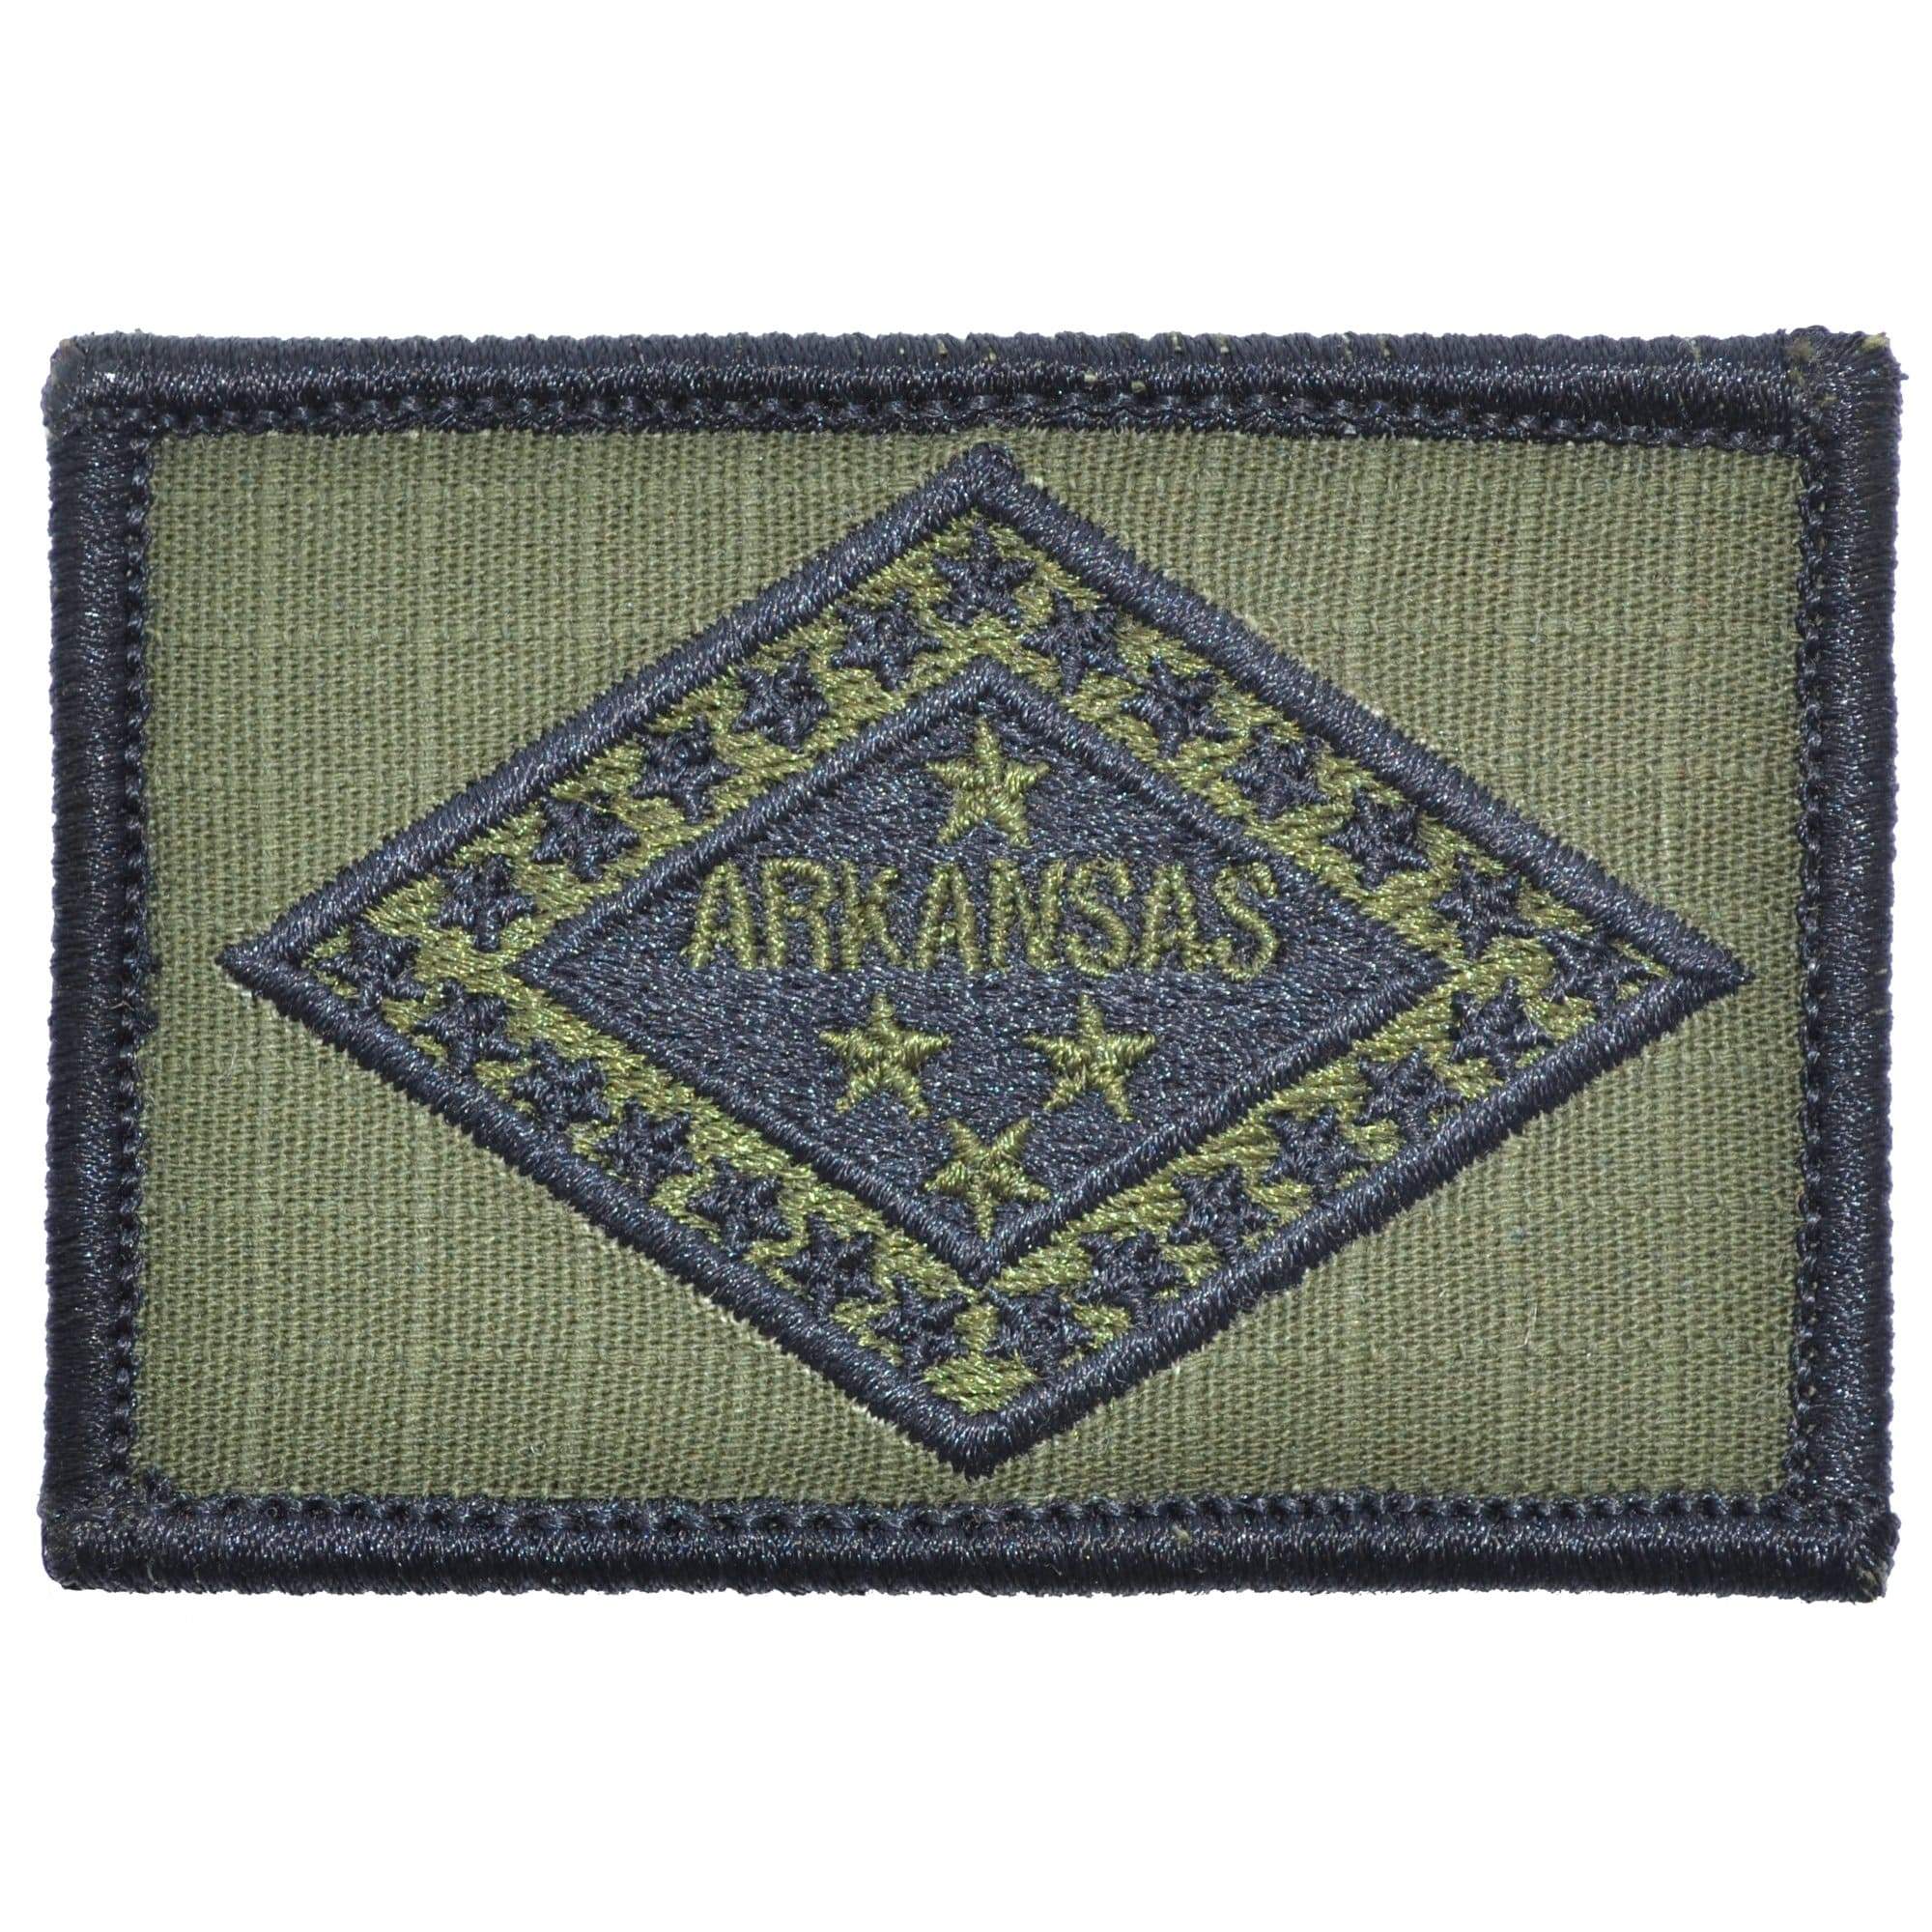 Tactical Gear Junkie Patches Olive Drab Arkansas State Flag - 2x3 Patch